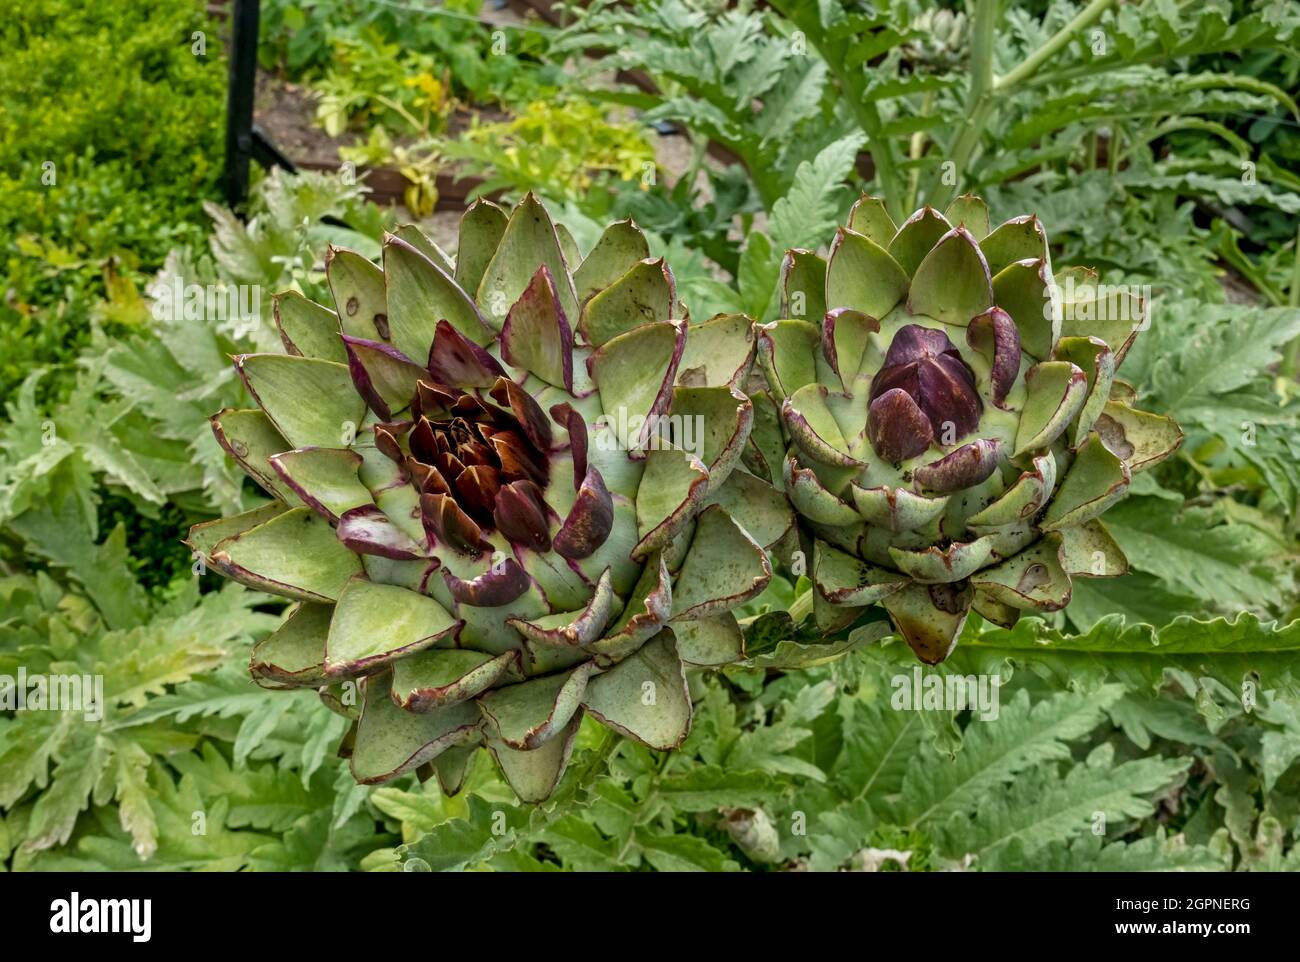 Close up of globe artichoke artichokes growing in a vegetable garden in summer England UK United Kingdom GB Great Britain Stock Photo